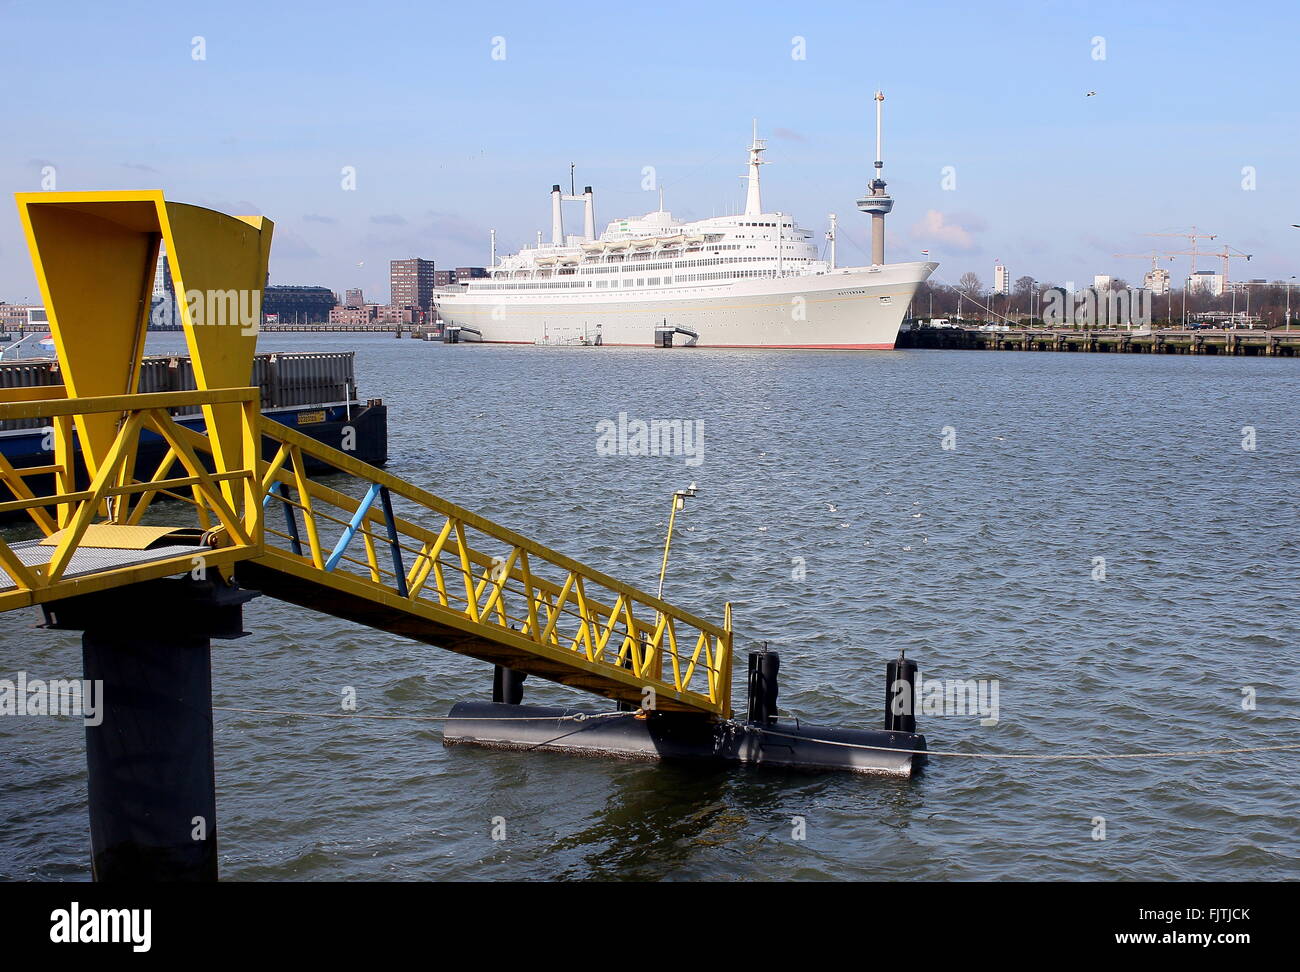 Hotel Ship SS Rotterdam, former ocean liner & cruise ship, moored in Rotterdam, Netherlands. Maashaven harbour, Euromast in back Stock Photo